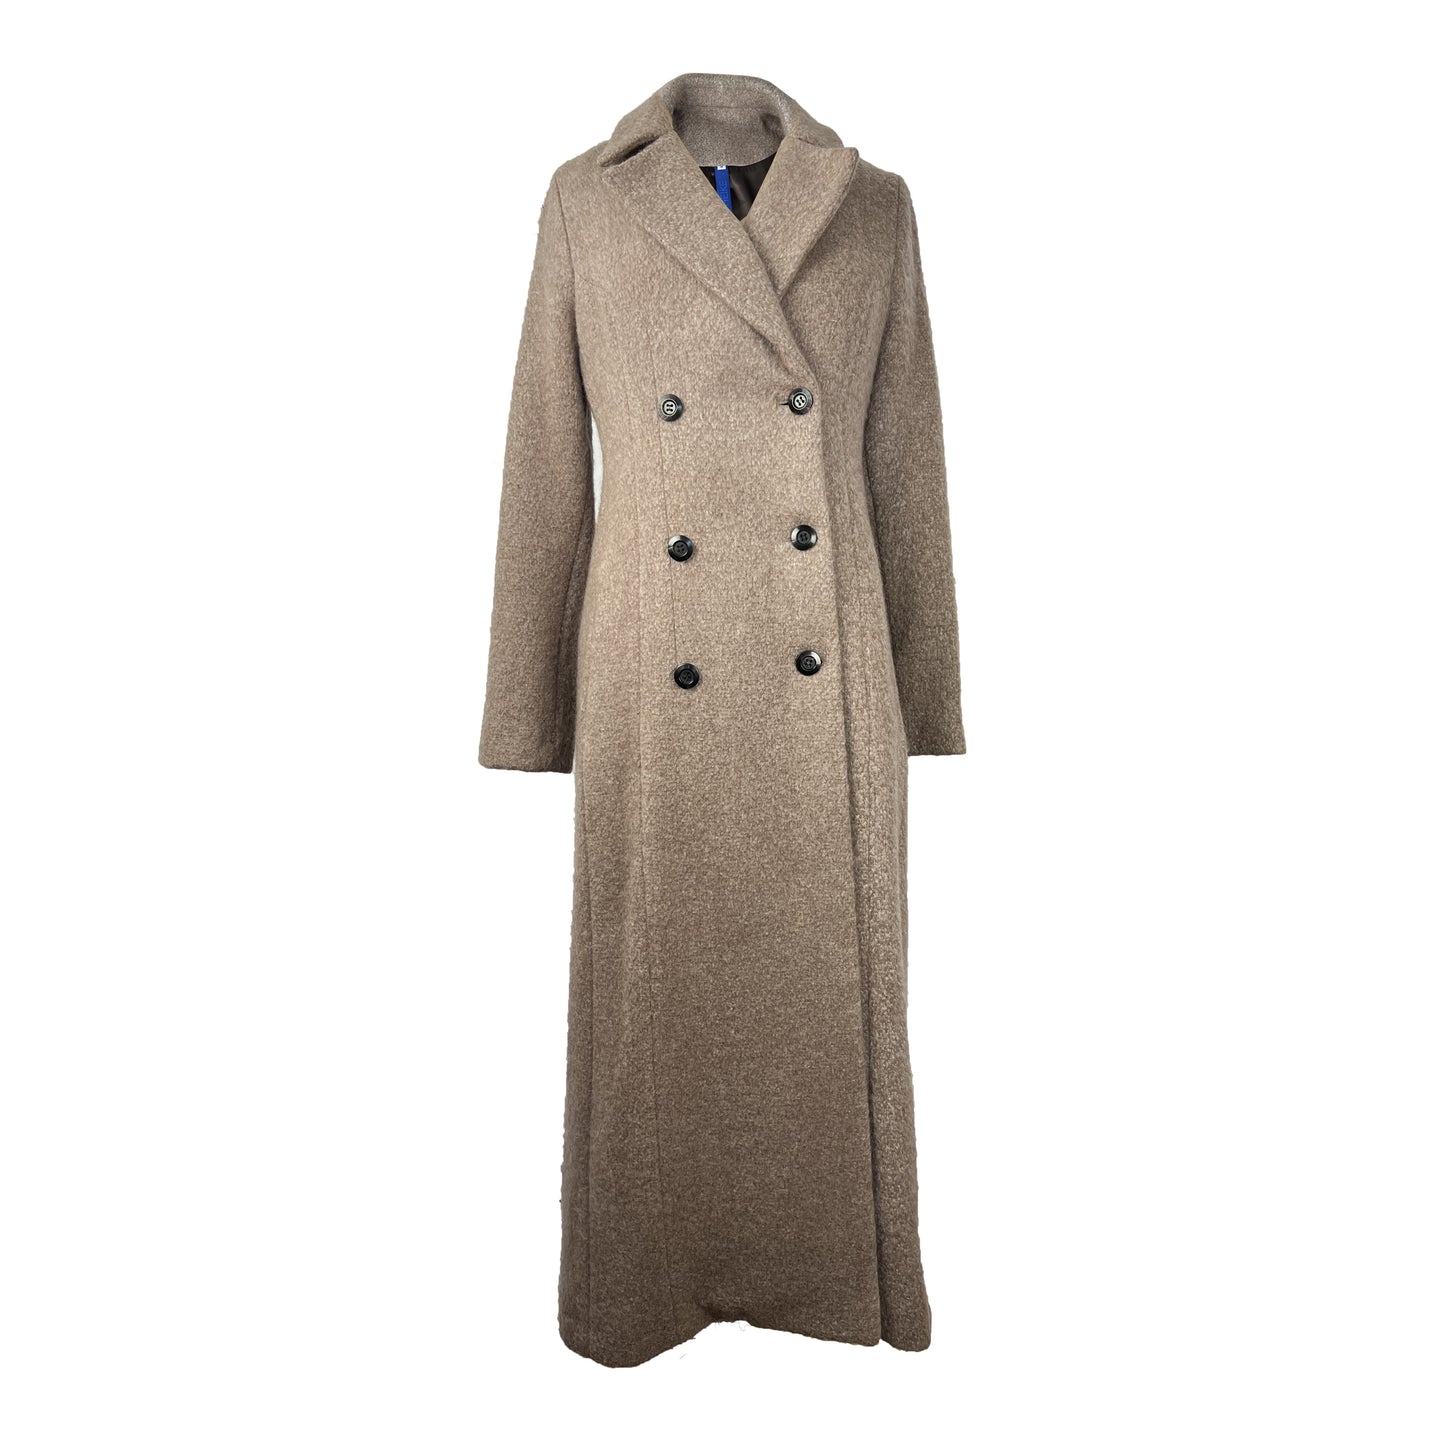 Mocha Beige classic maxicoat with long fit and slim appearance made of mohair blend with wool